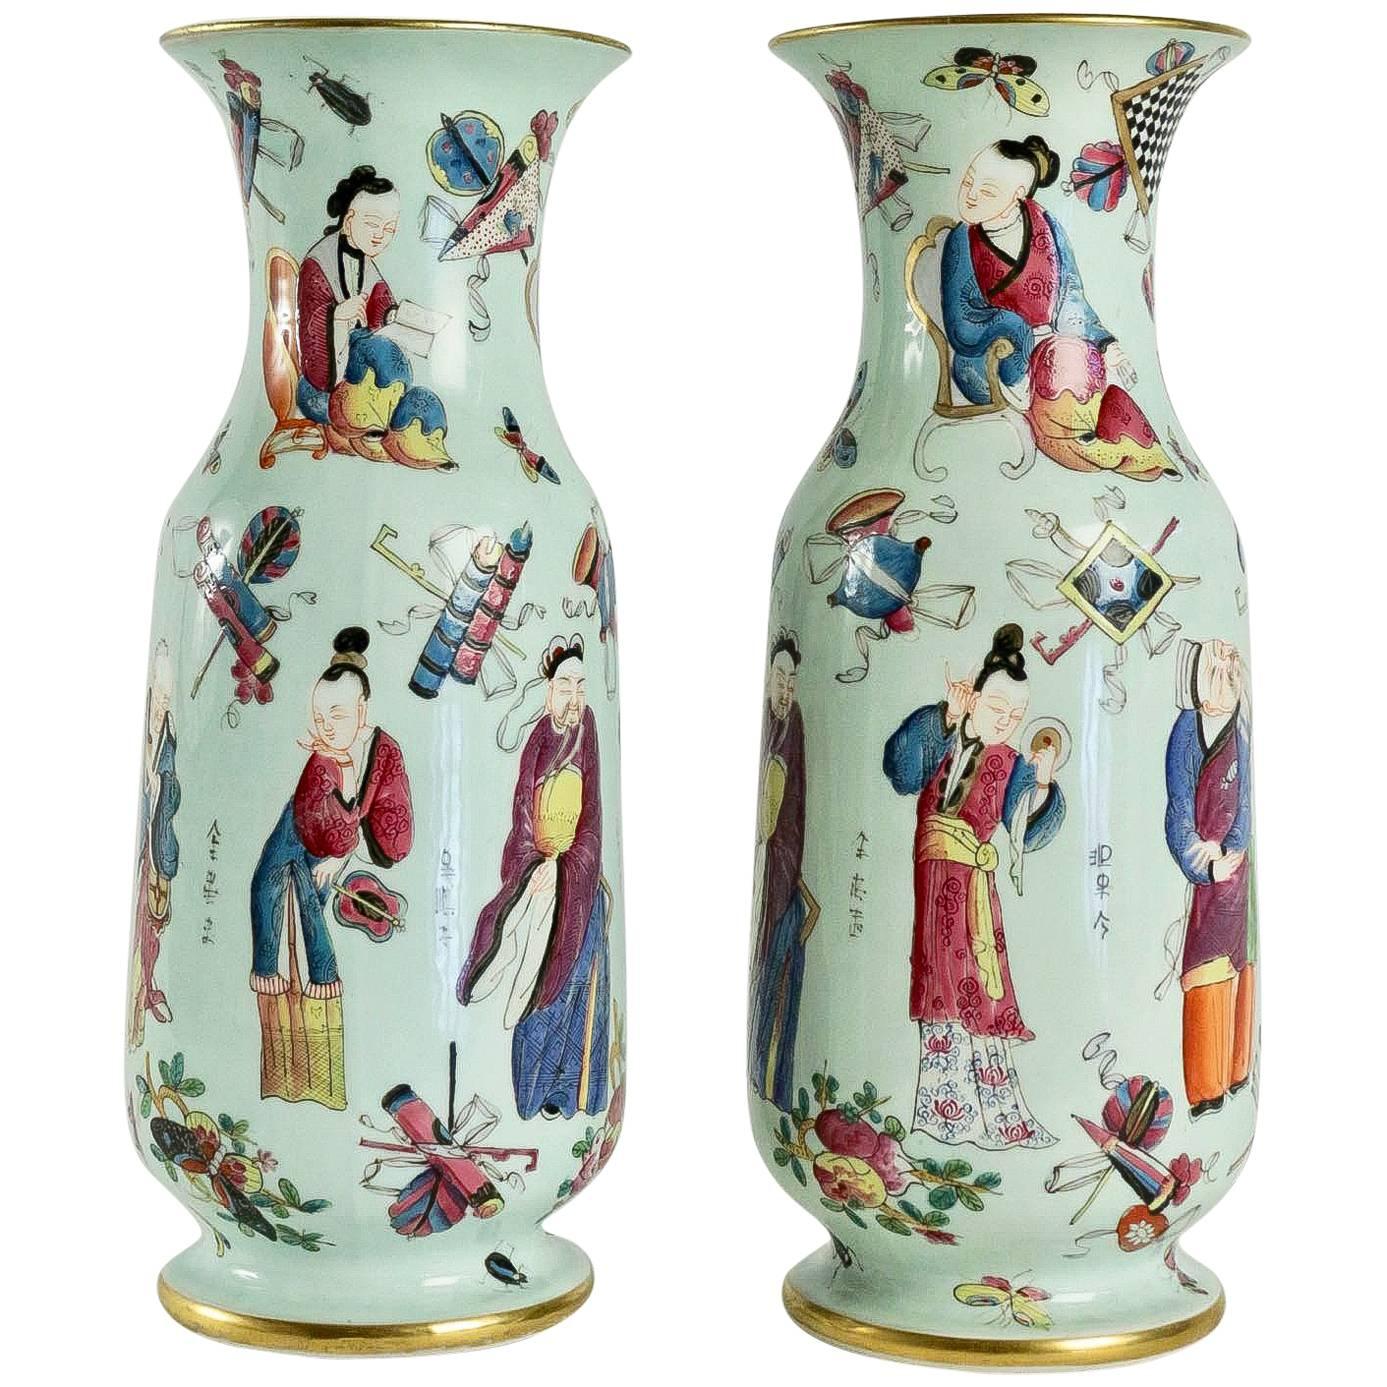 Bayeux, French 19th Century, Polychrome Celadon Family Pair of Vases circa 1850